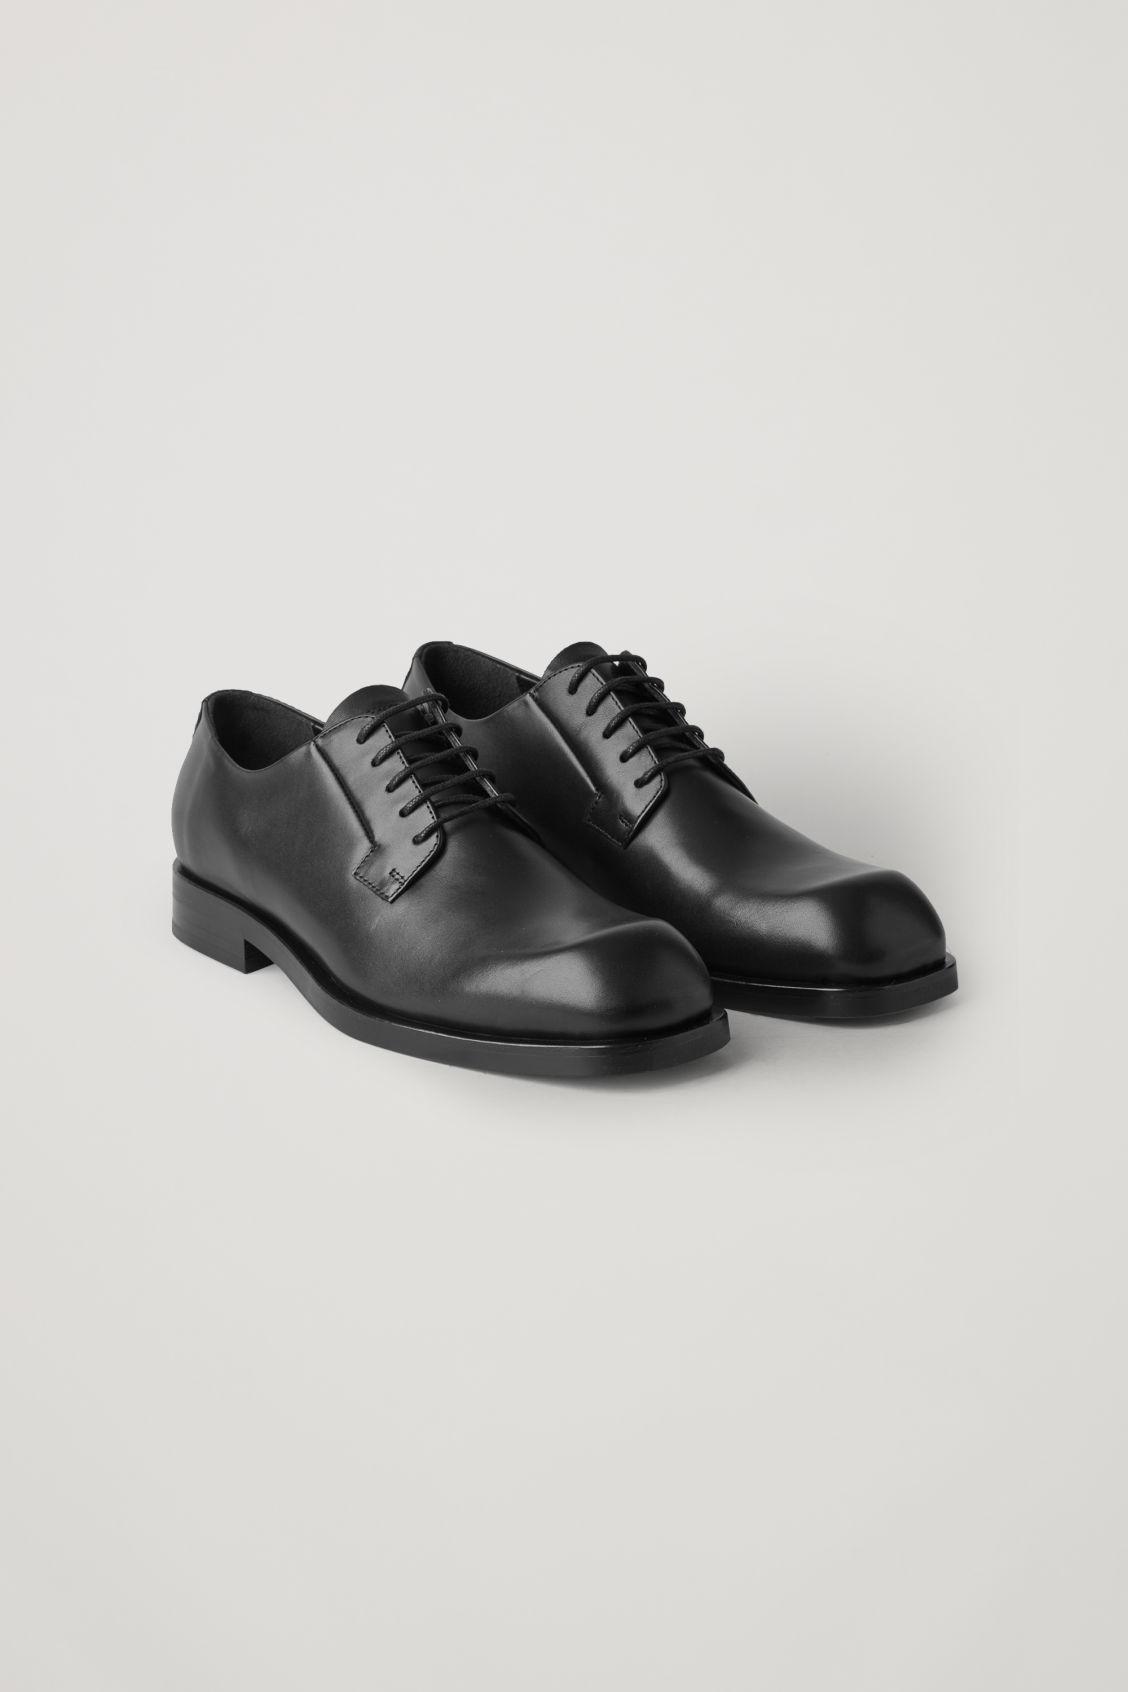 COS Leather Square-toe Derby Shoes in Black for Men | Lyst